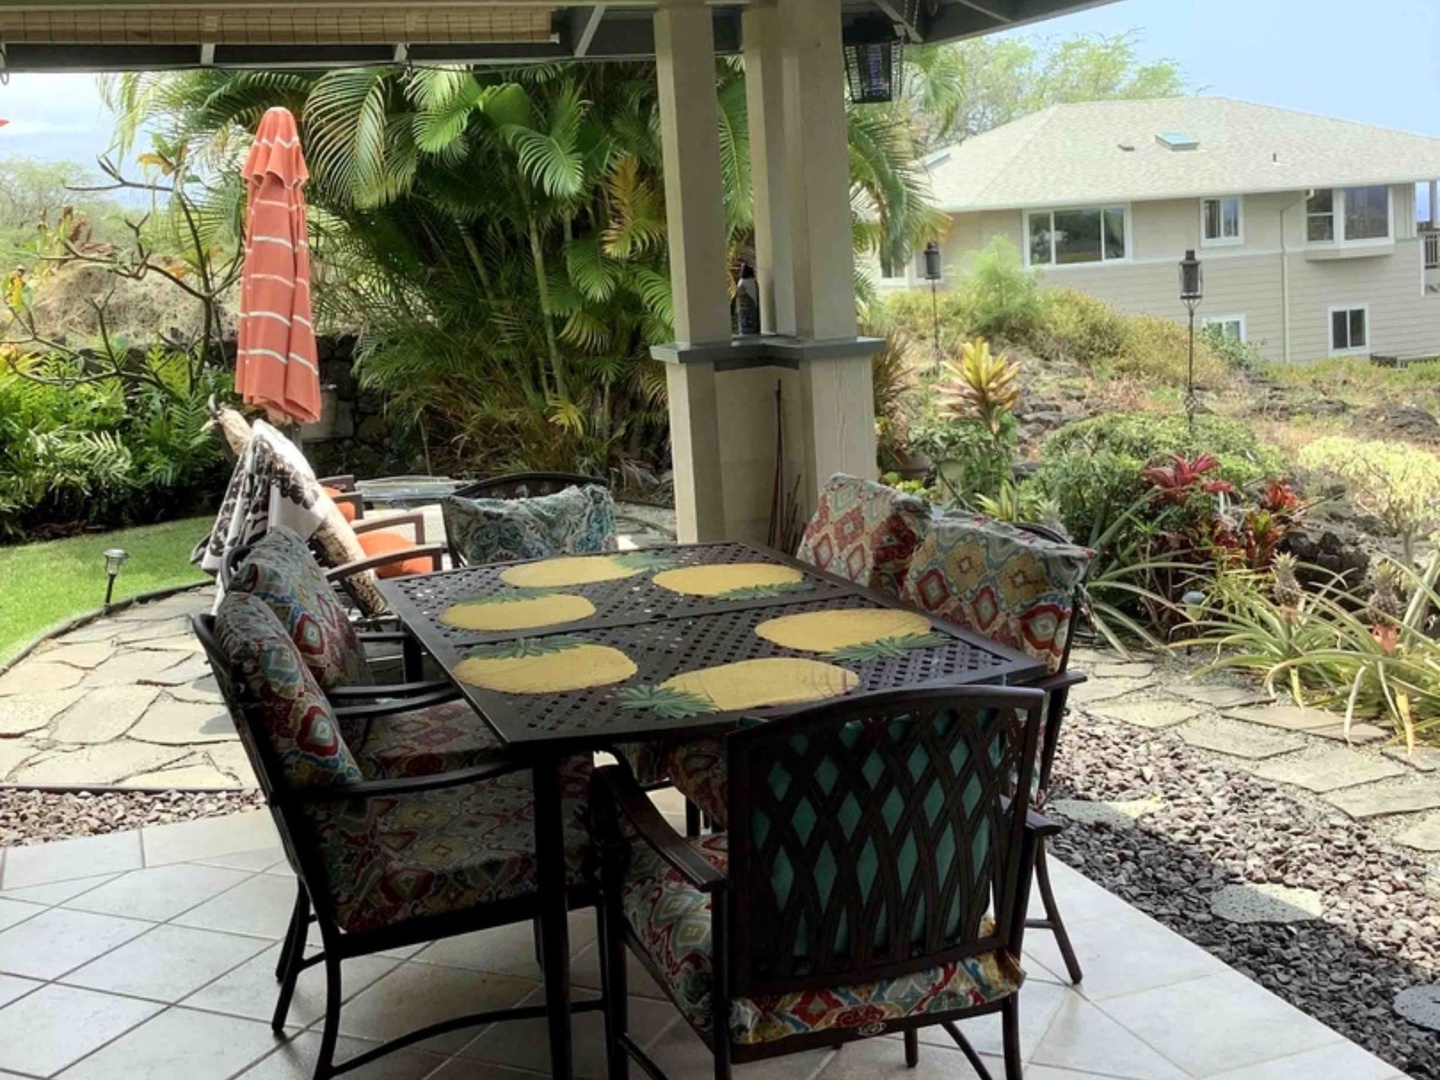 Kailua Kona Vacation Rentals, Hale Alaula - Ocean View - Breezy outdoor dining, perfect for grilling!